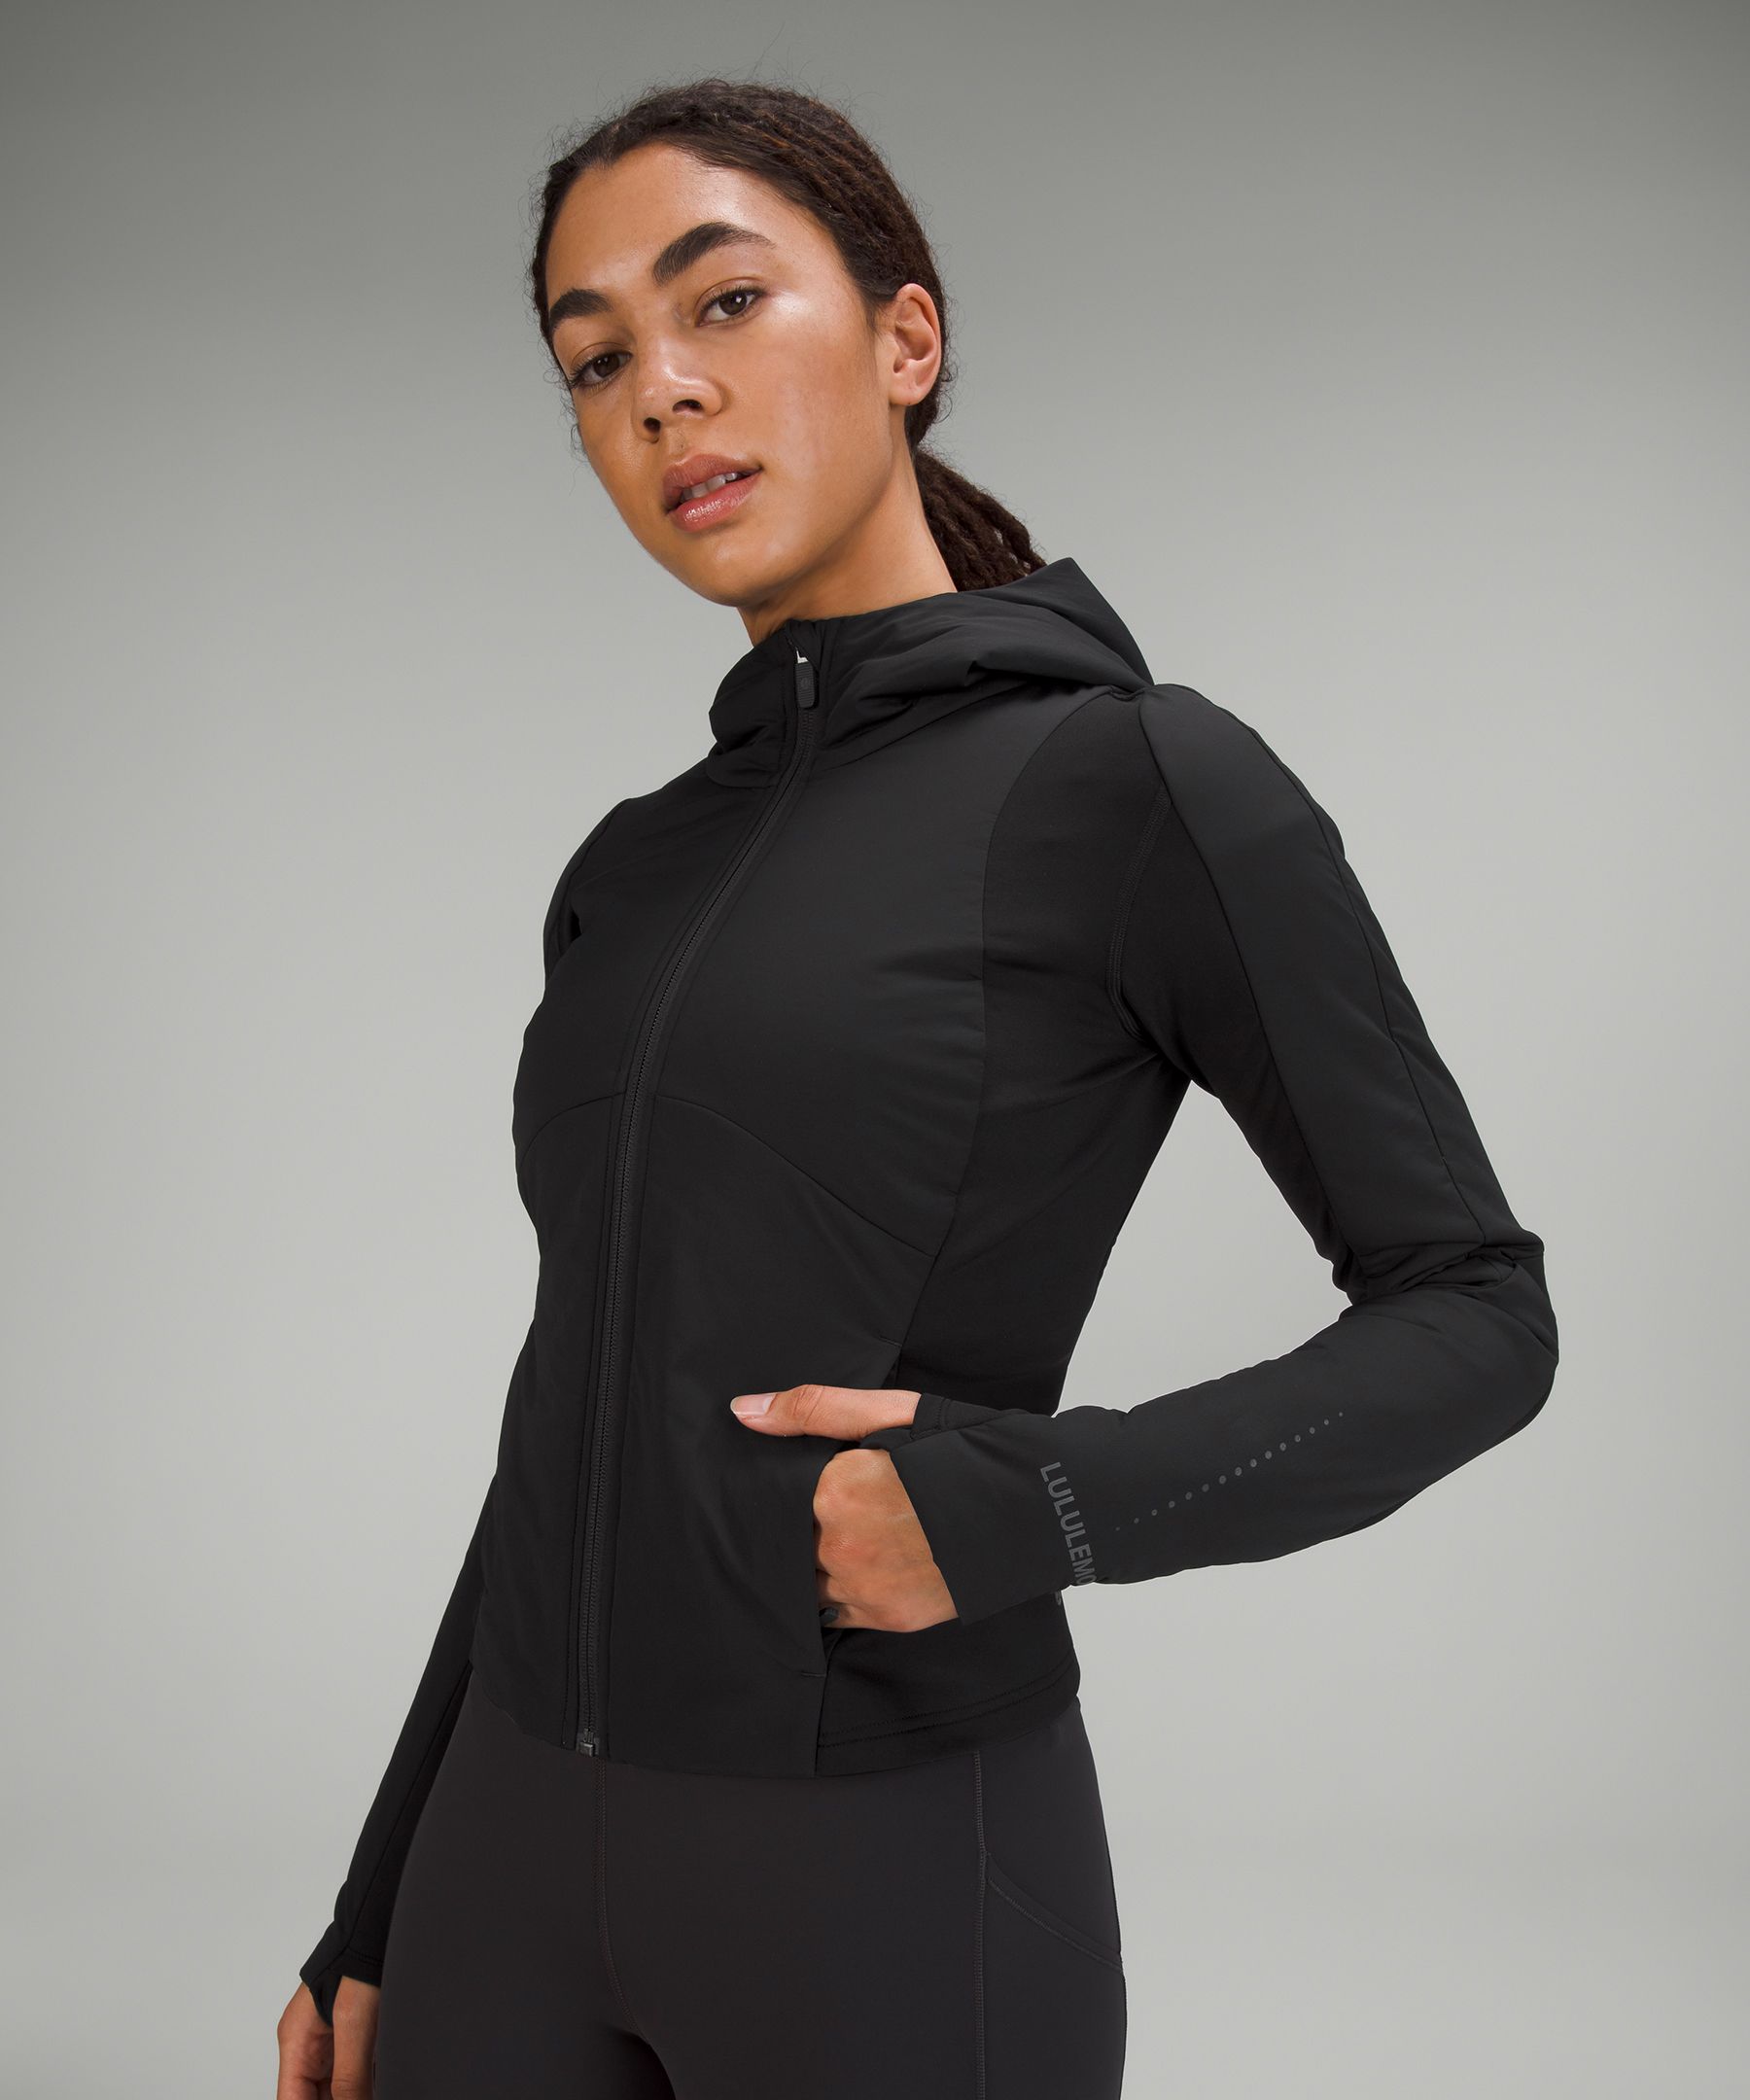 Fit Review: Push Your Pace Jacket - The Sweat Edit